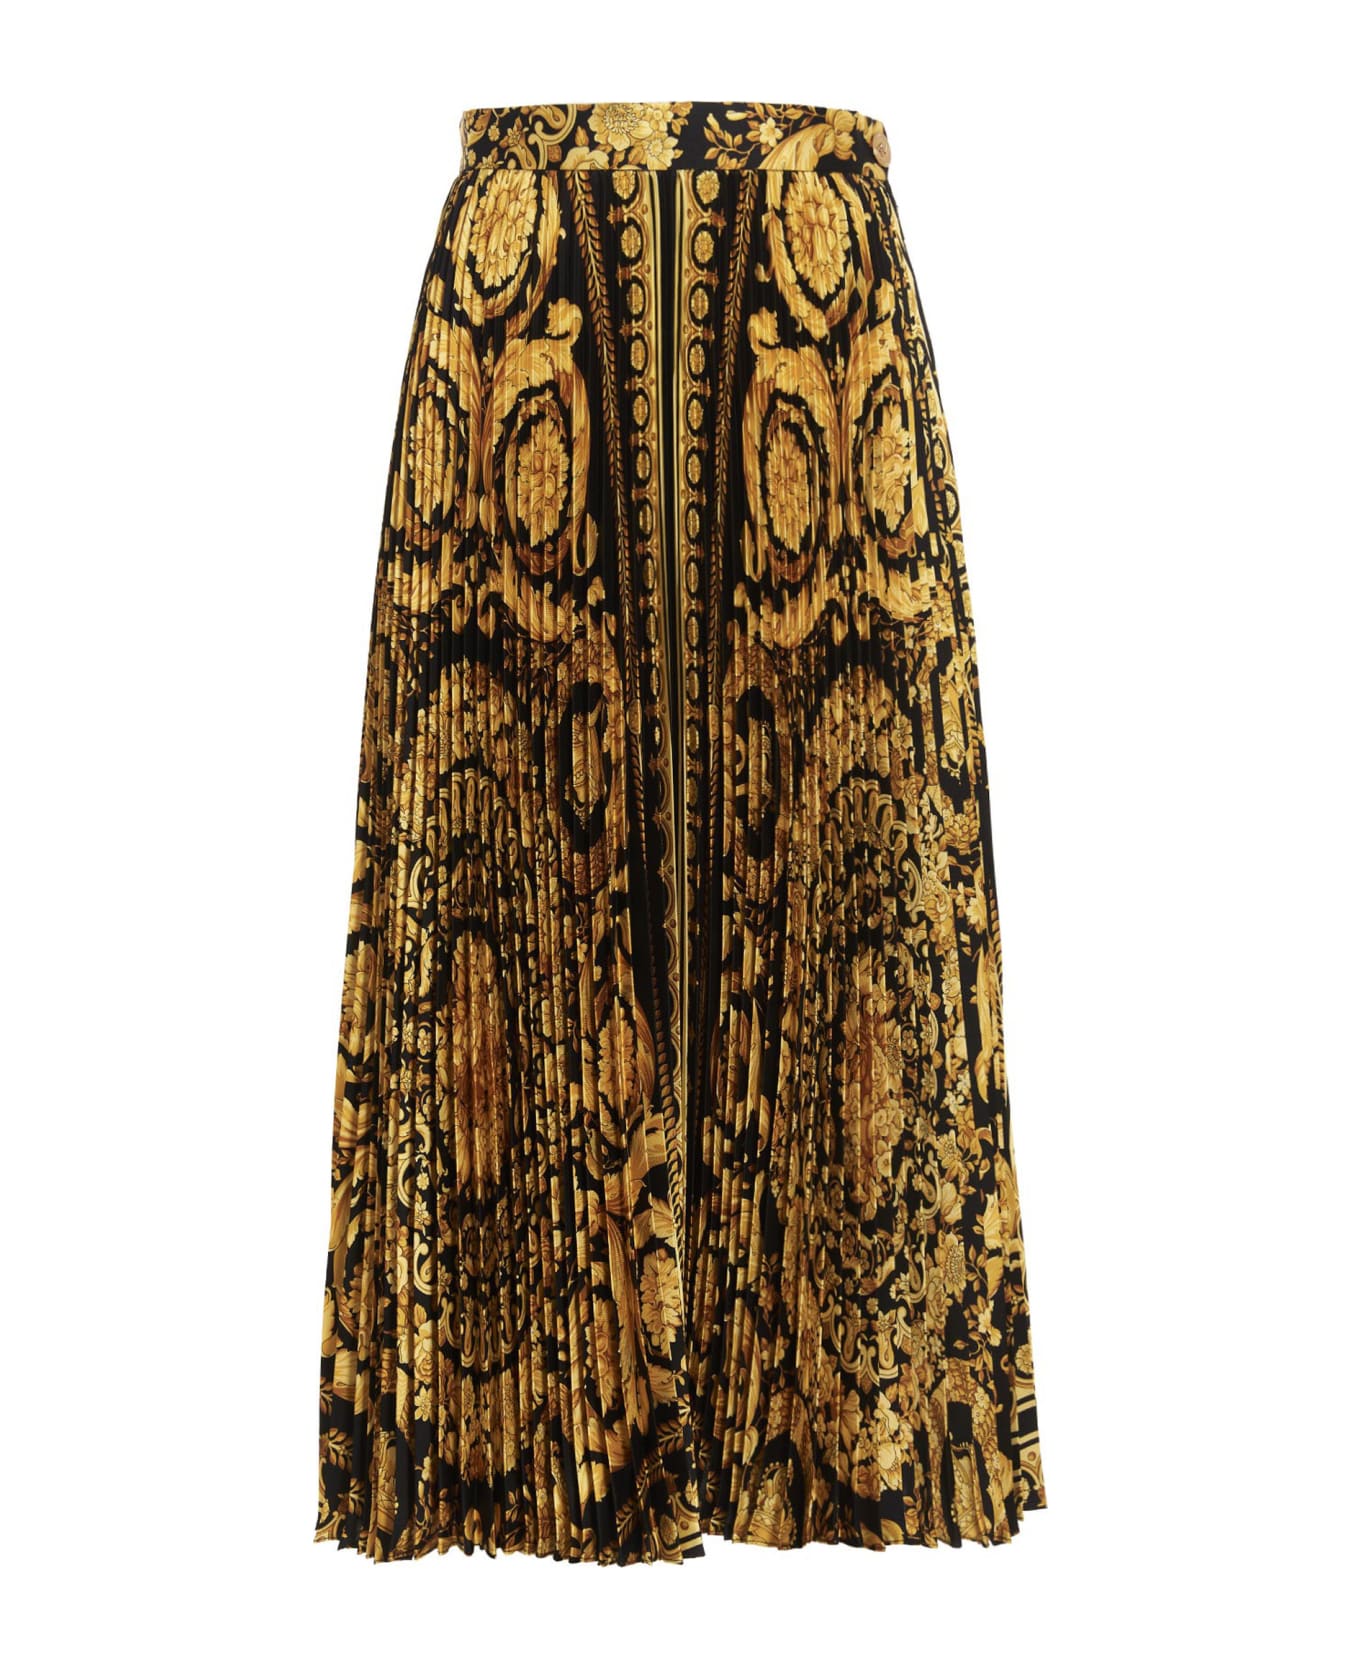 Versace Baroque Pattern Pleated Skirt - Multicolor